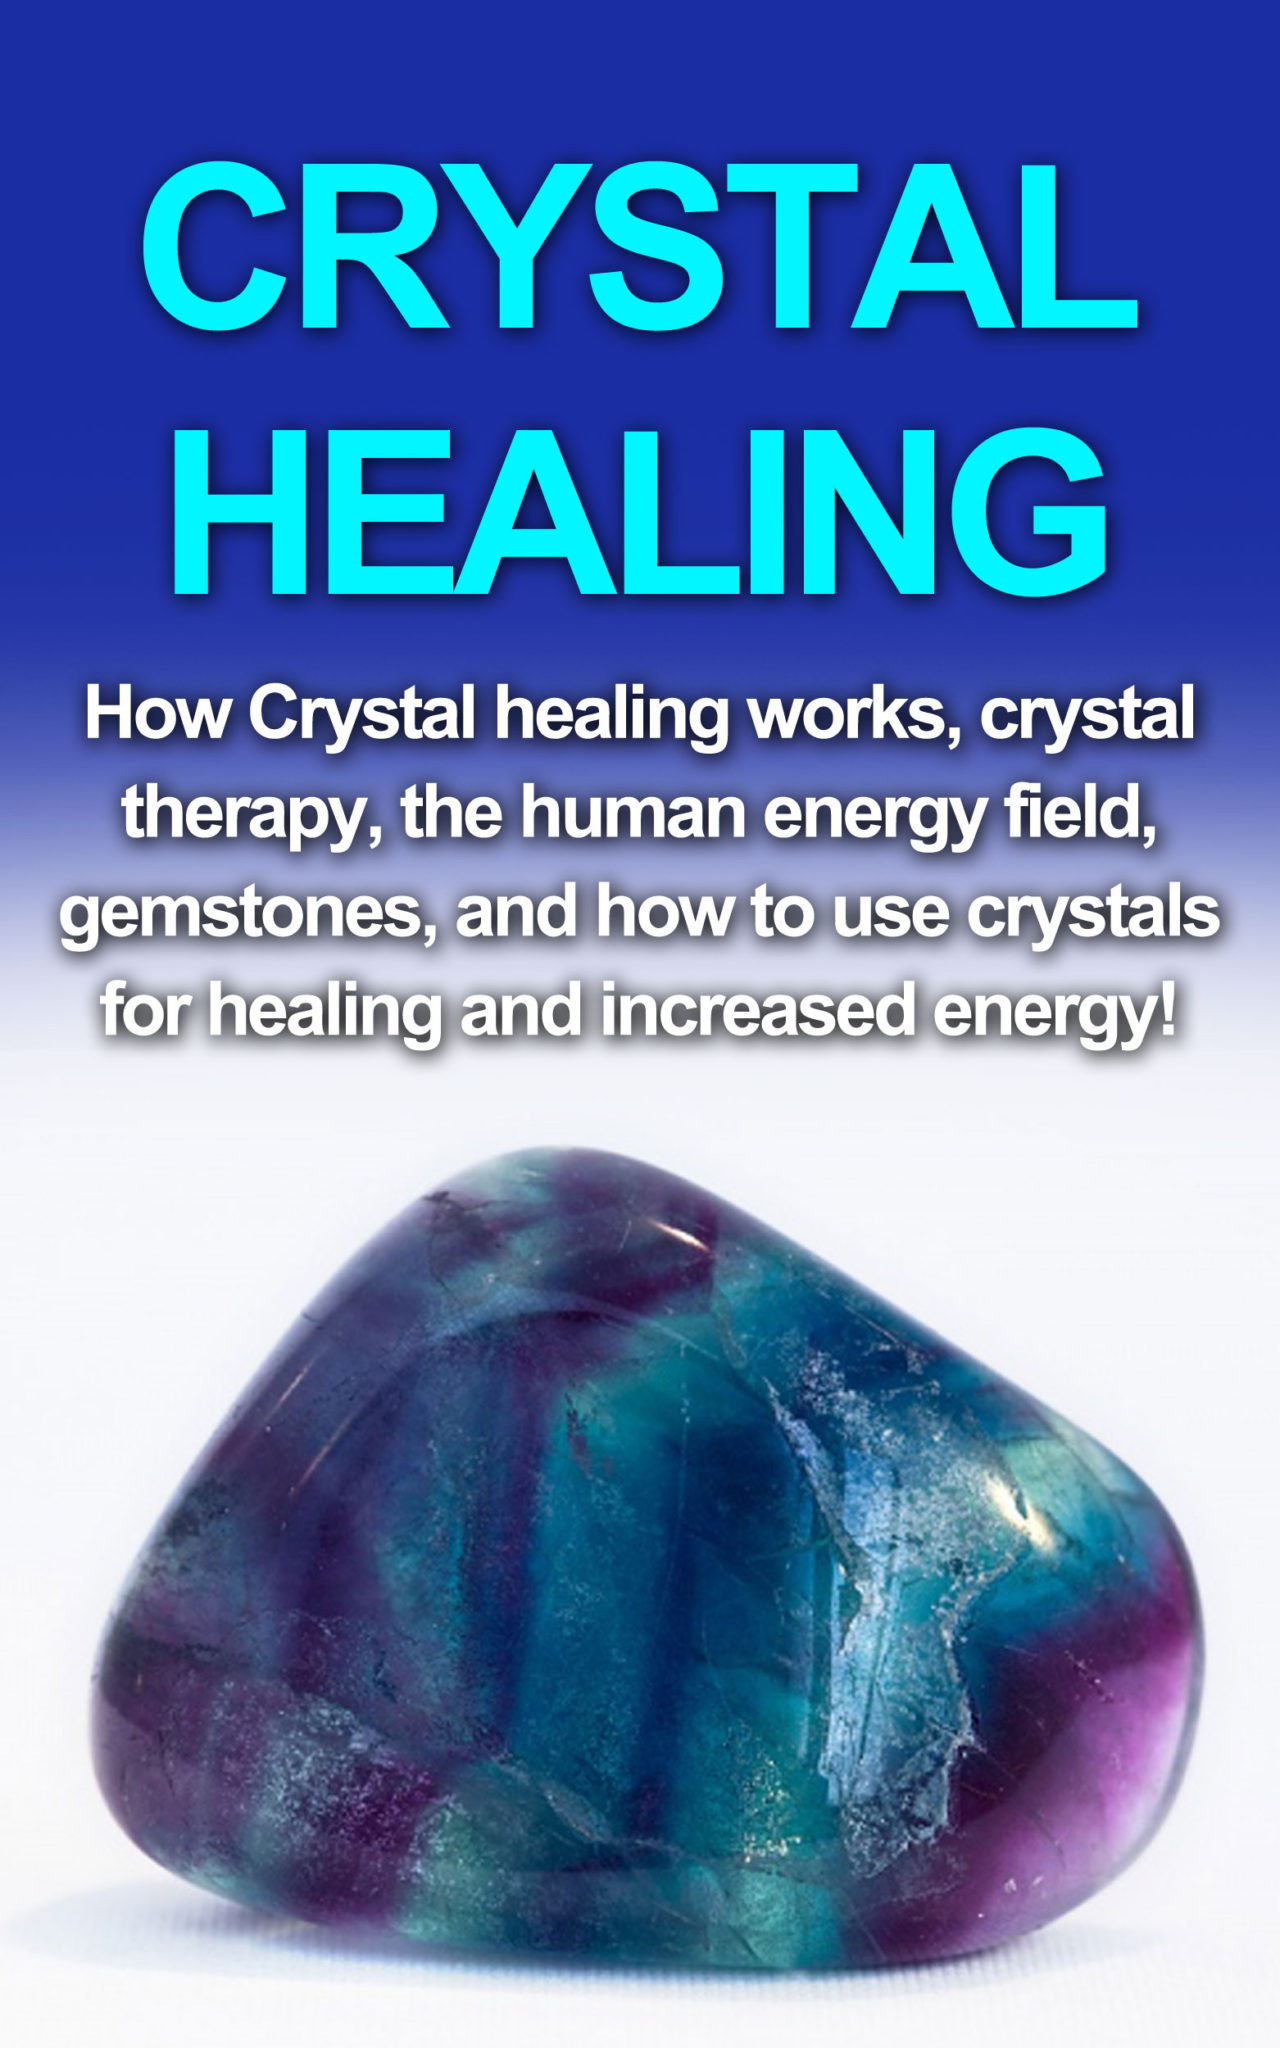 FREE: Crystal Healing: How crystal healing works, crystal therapy, the human energy field, gemstones, and how to use crystals for healing and increased energy! by Amber Rainey